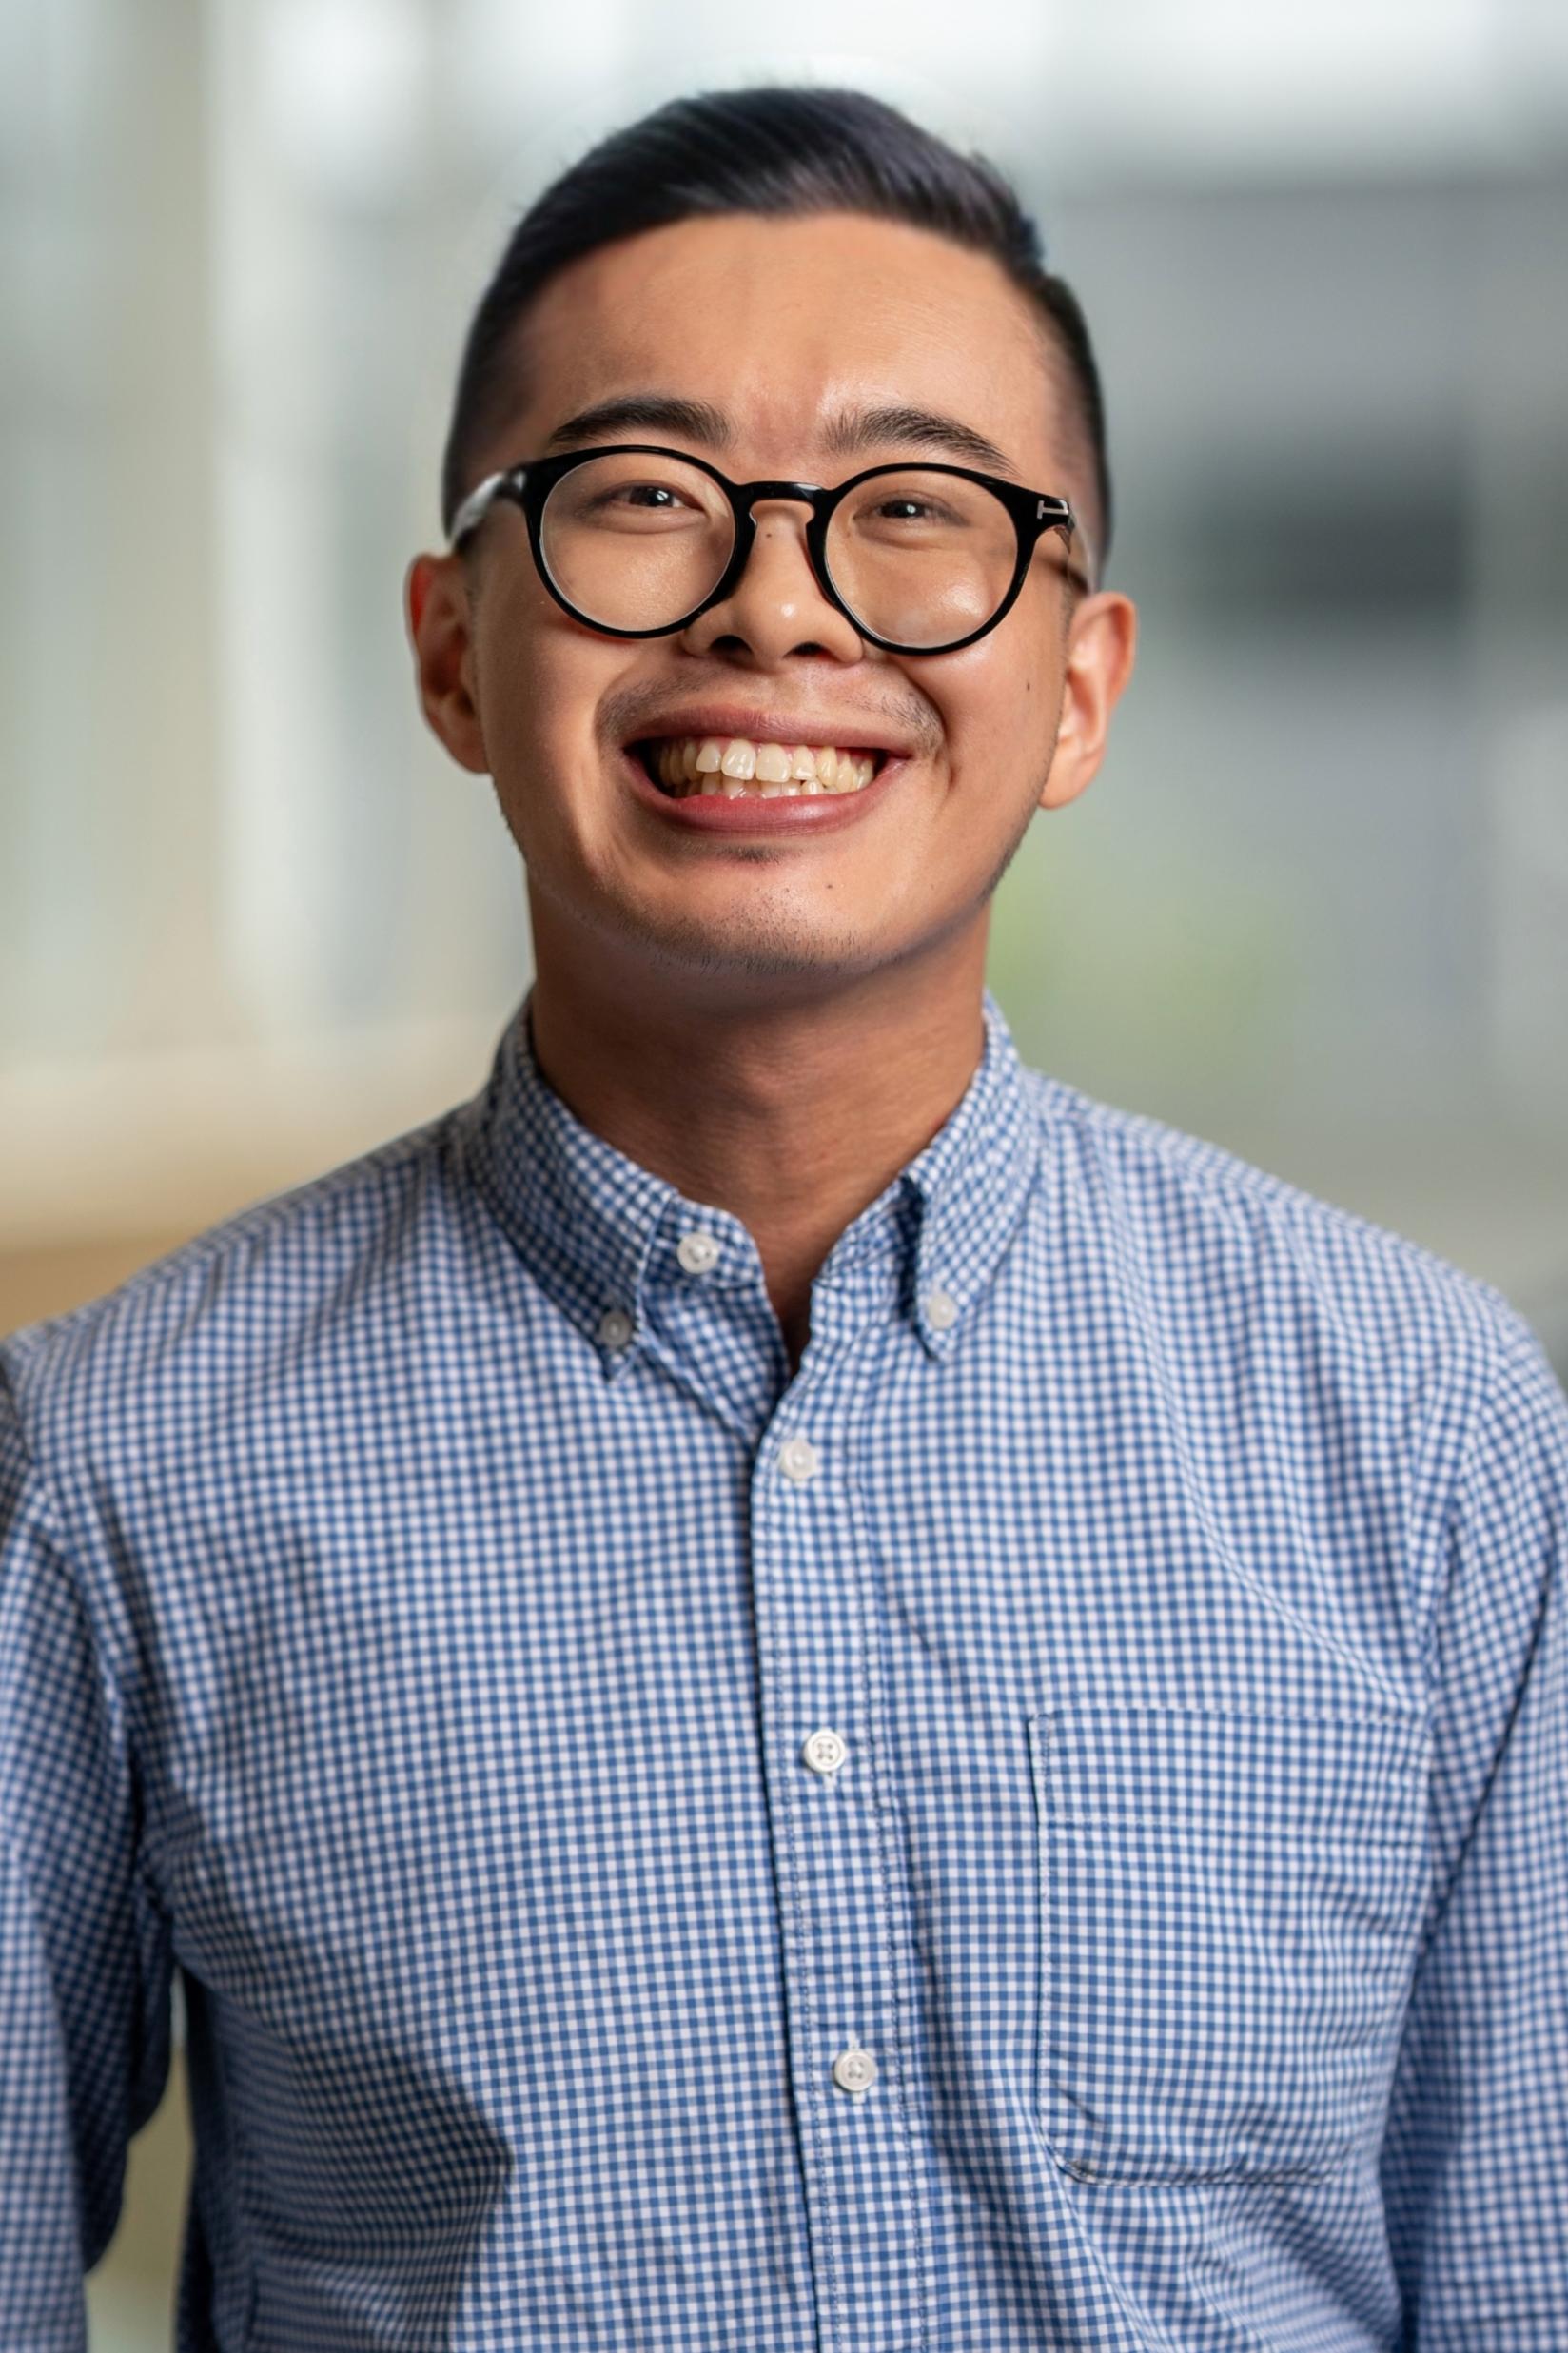 Andrew Situ smiling with glasses and checked shirt and open foyer in blurred background